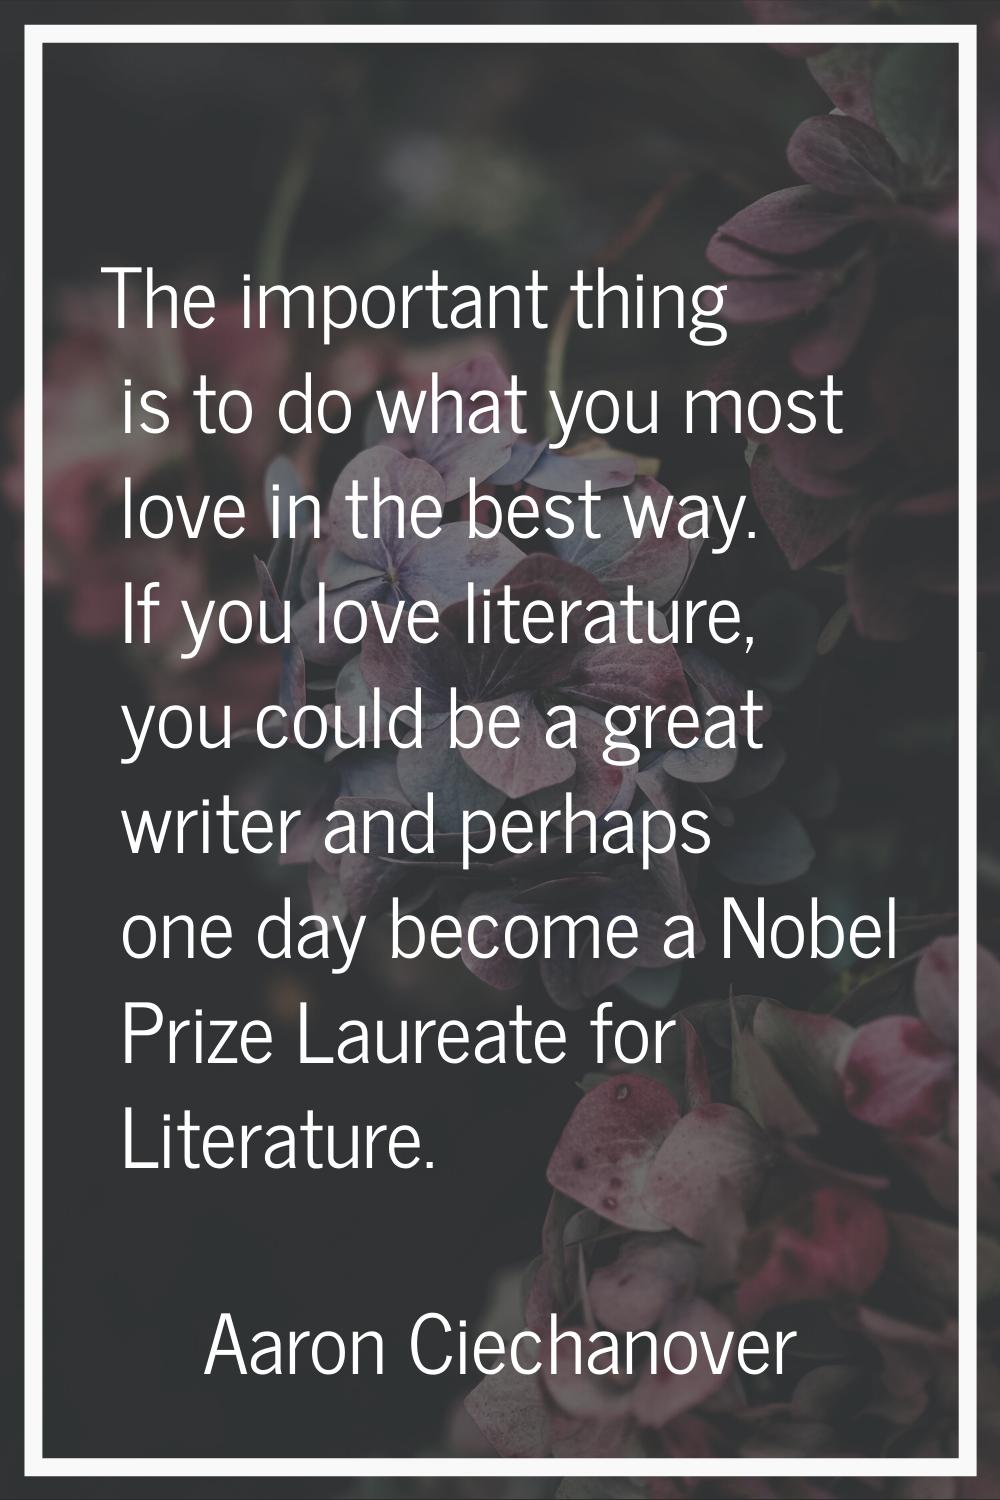 The important thing is to do what you most love in the best way. If you love literature, you could 